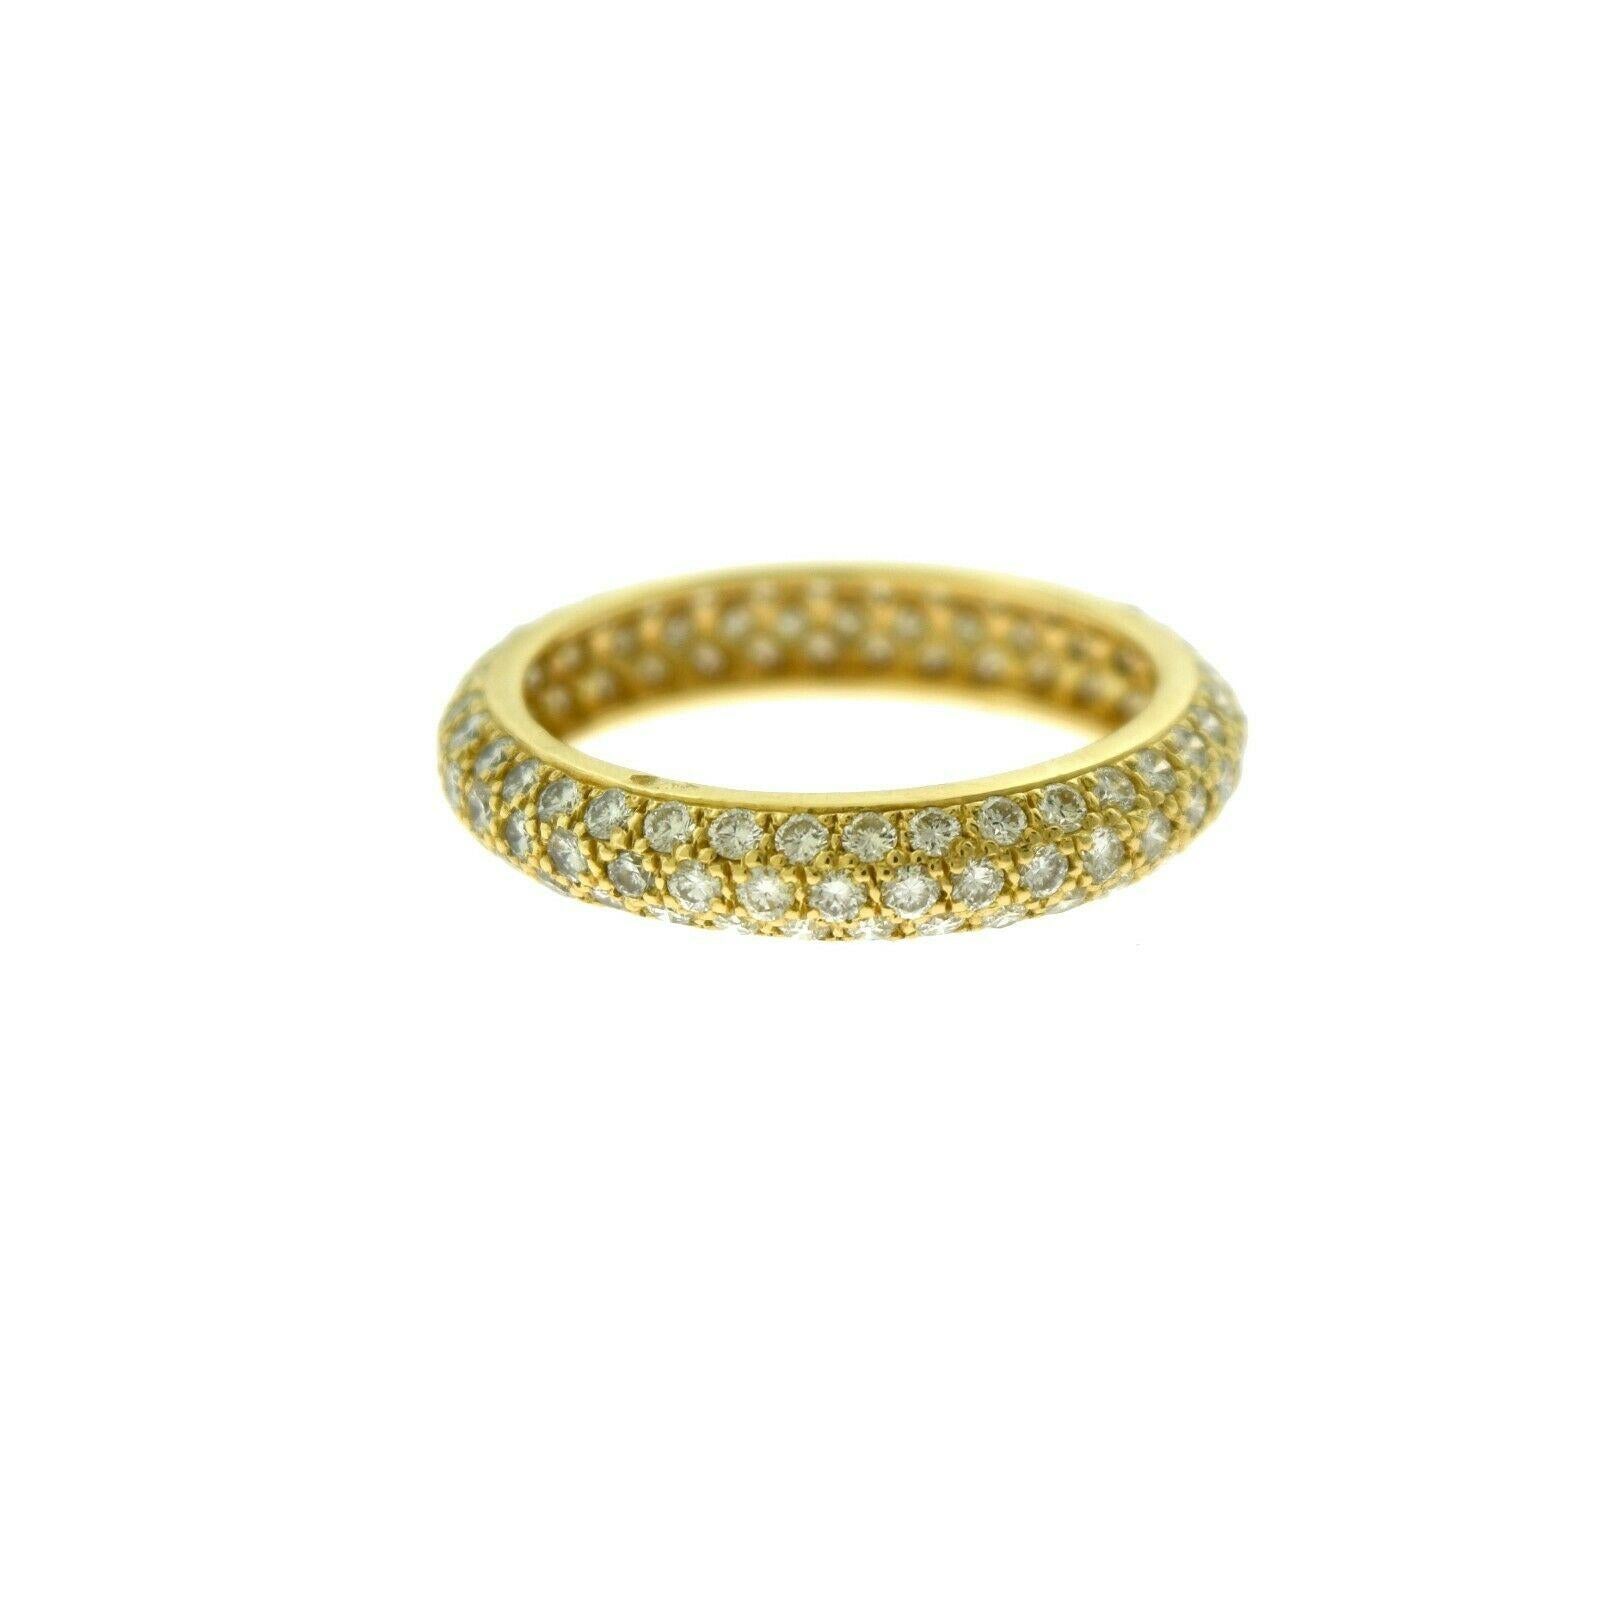 Designer: Cartier

Style: Eternity Band Ring

Metal: Yellow Gold

Metal Purity: 18k

Stones: Round Brilliant Cut Diamonds

Approximate Carat Weight: ~ 3.2 ct

Total Item Weight (grams): 3.0

Ring Size: 51 (euro) 

Includes:  24 Months Brilliance